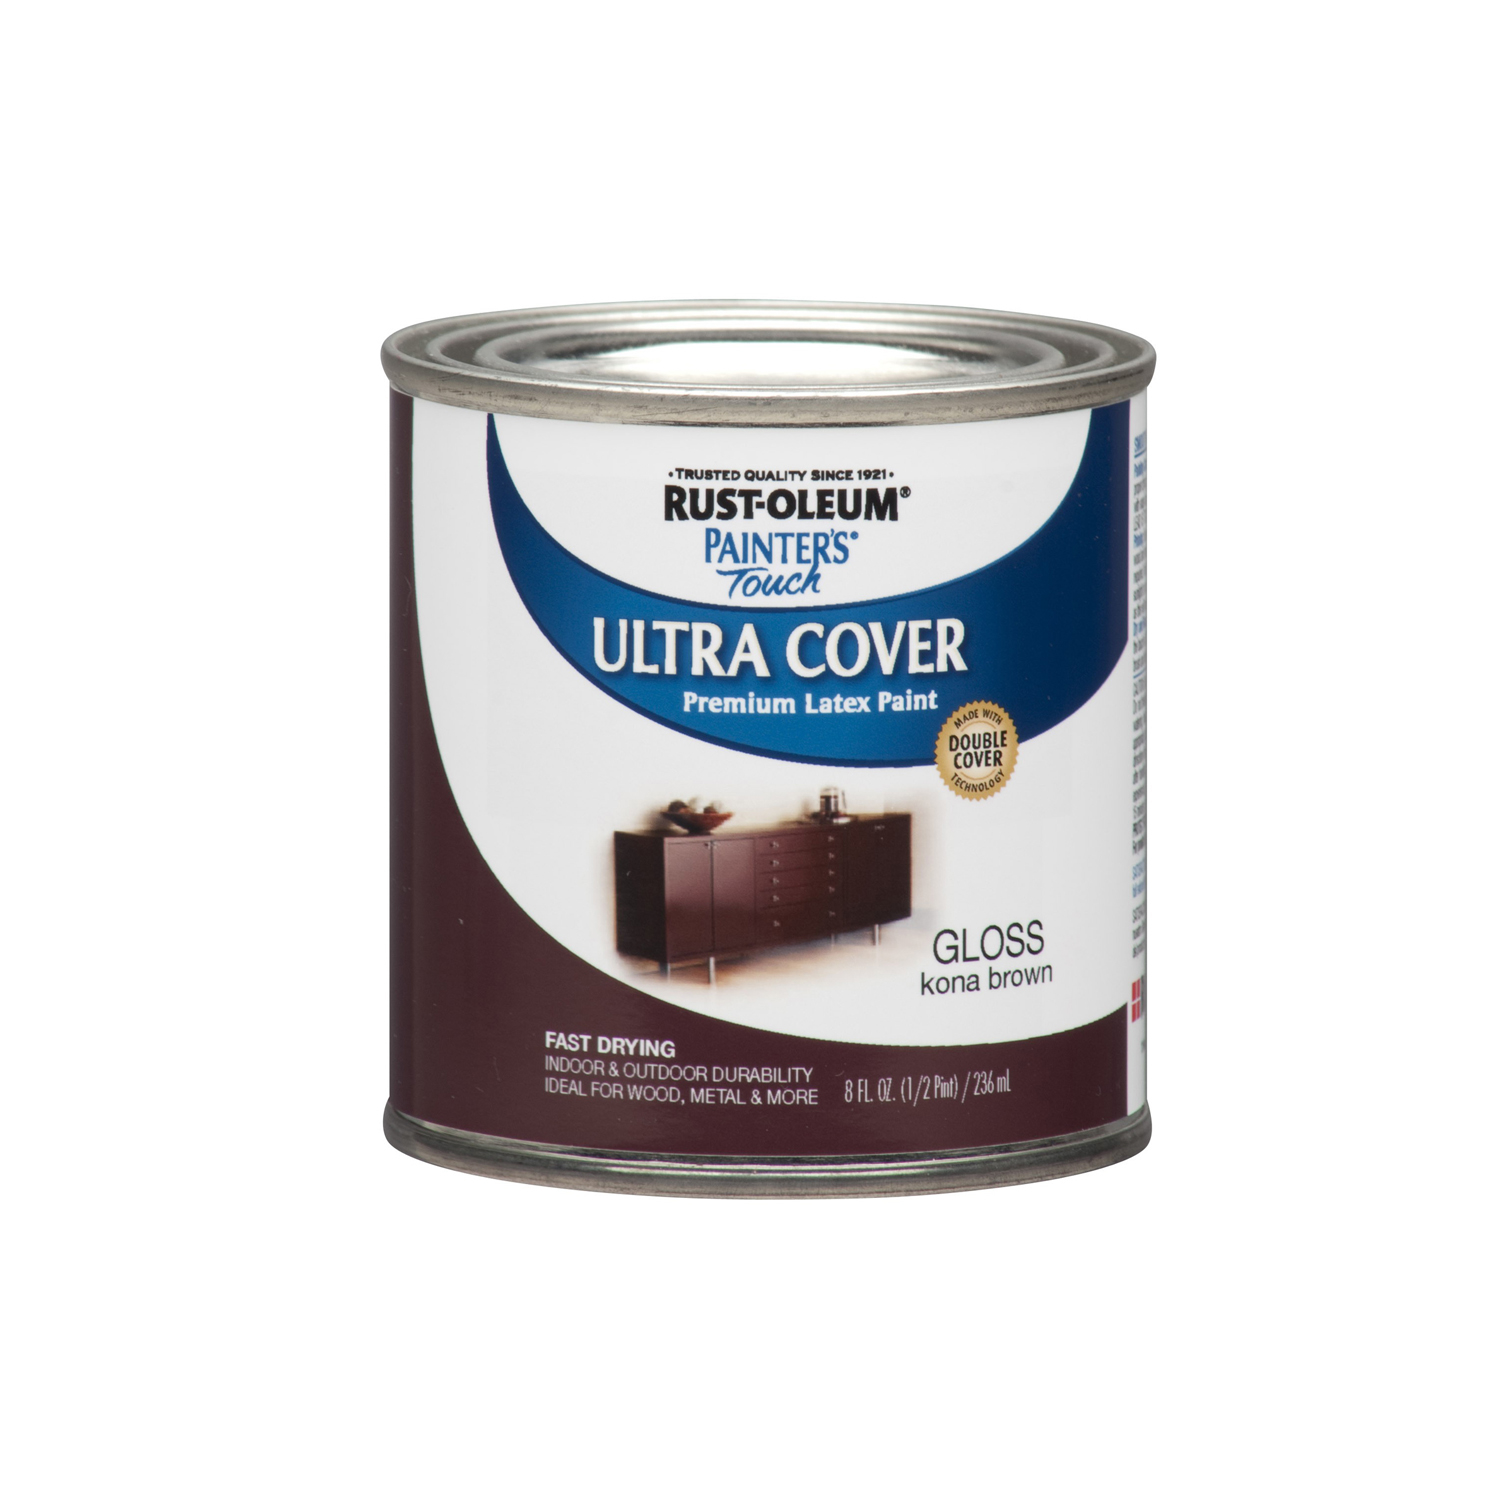 Rust-Oleum Painters Touch Ultra Cover Gloss Kona Brown Water-Based Paint Exterior & Interior 8 oz